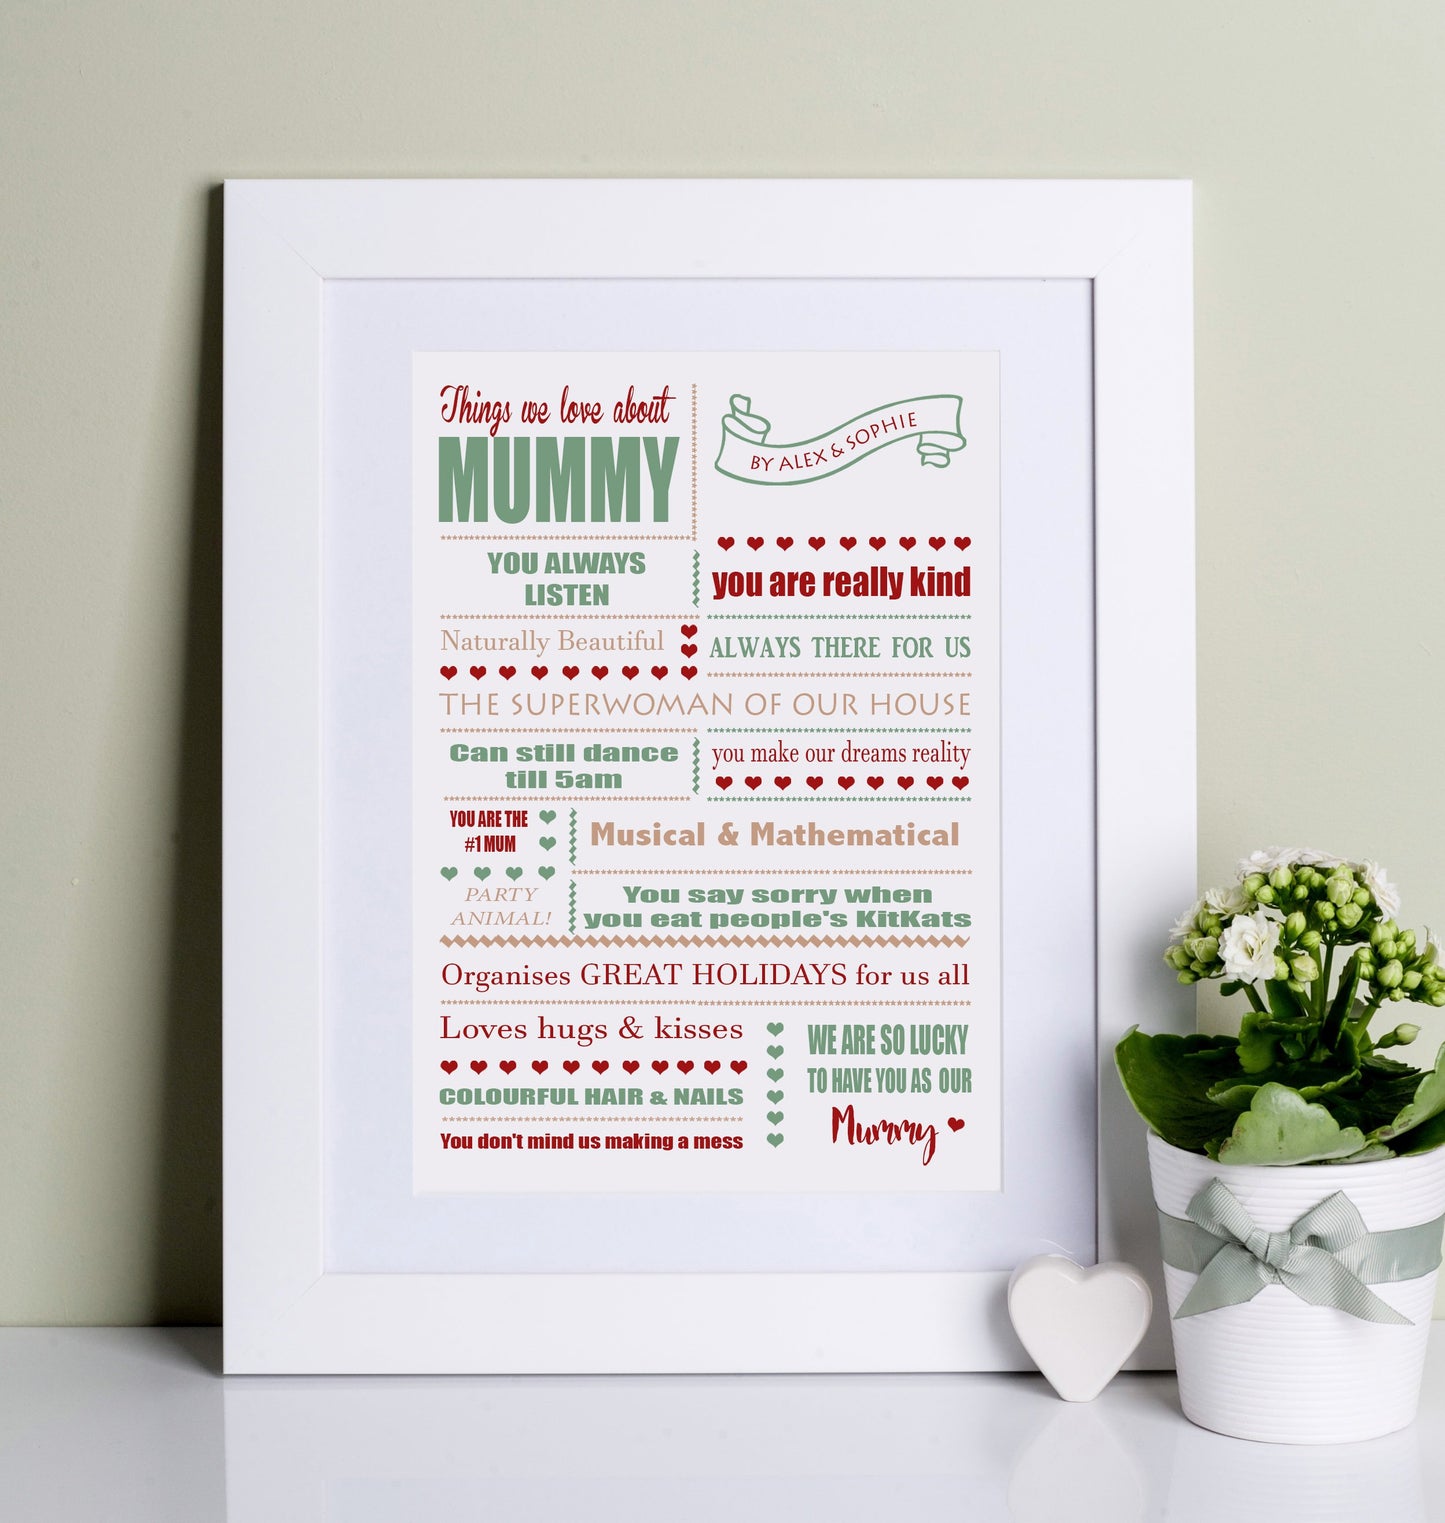 Things we love about Mum Print